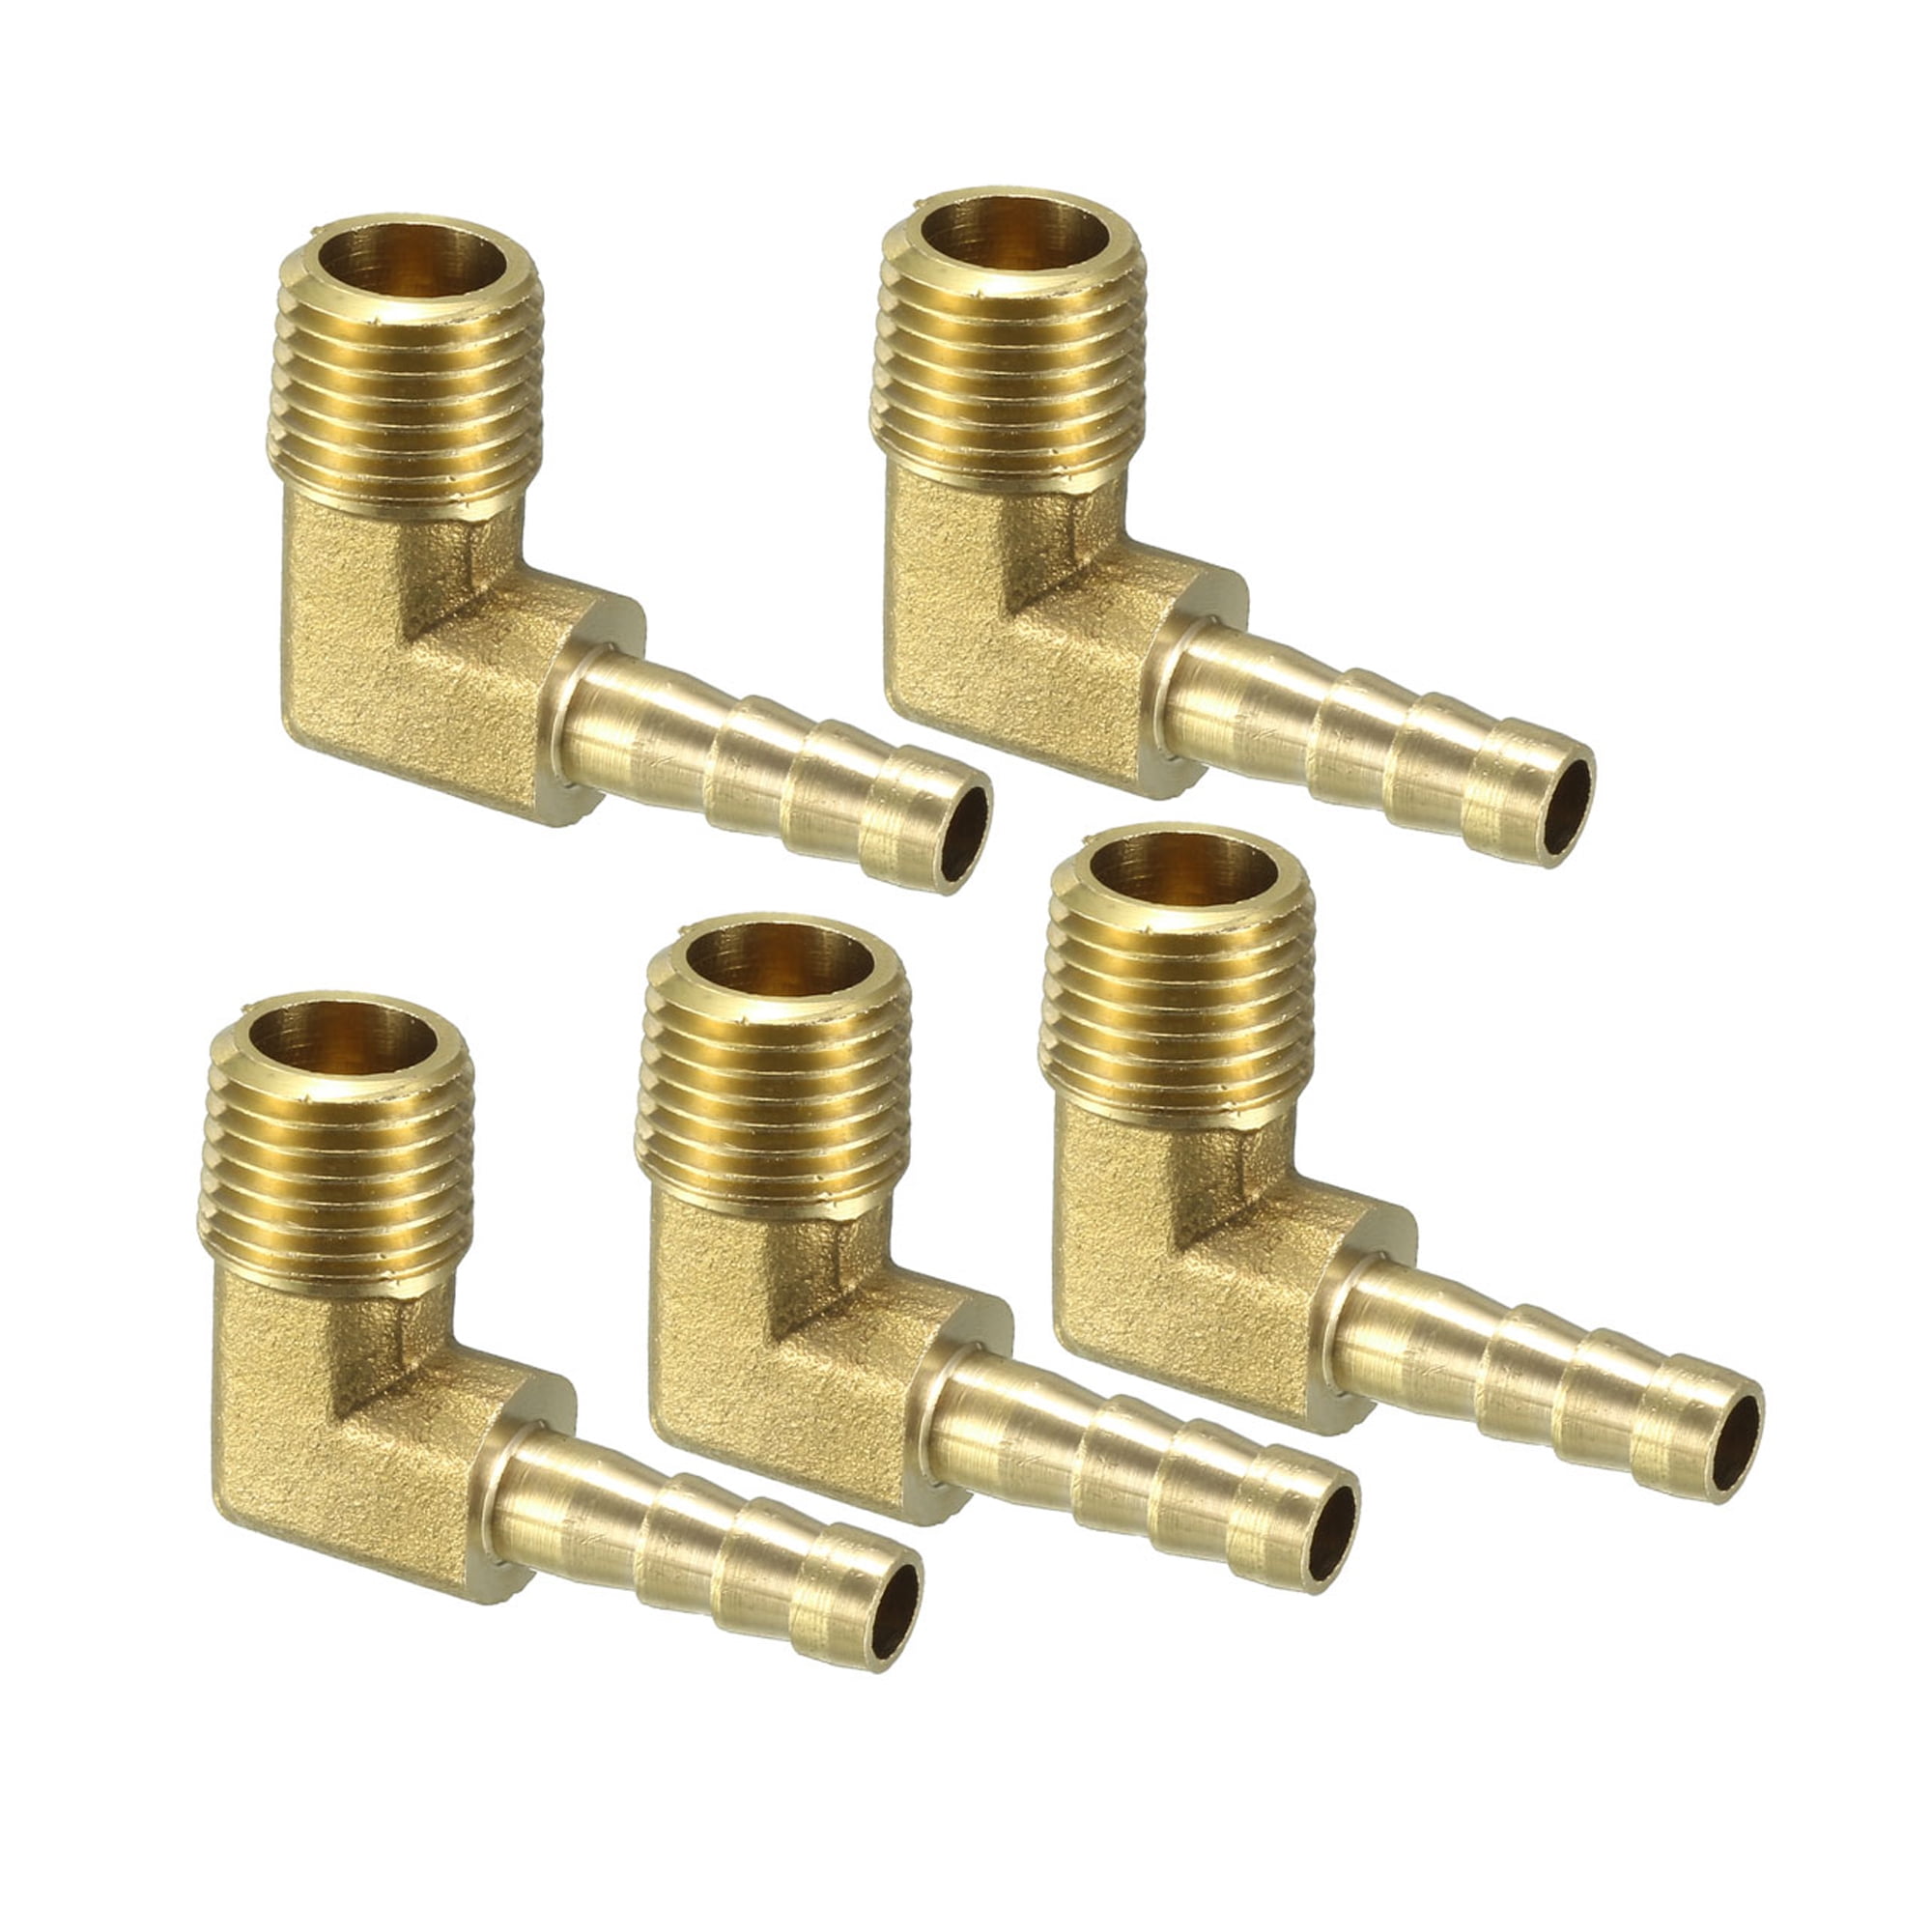 5 Pcs Male 1/4 PT to Male 1/4 PT Brass Straight Pipe Fitting Adapter 